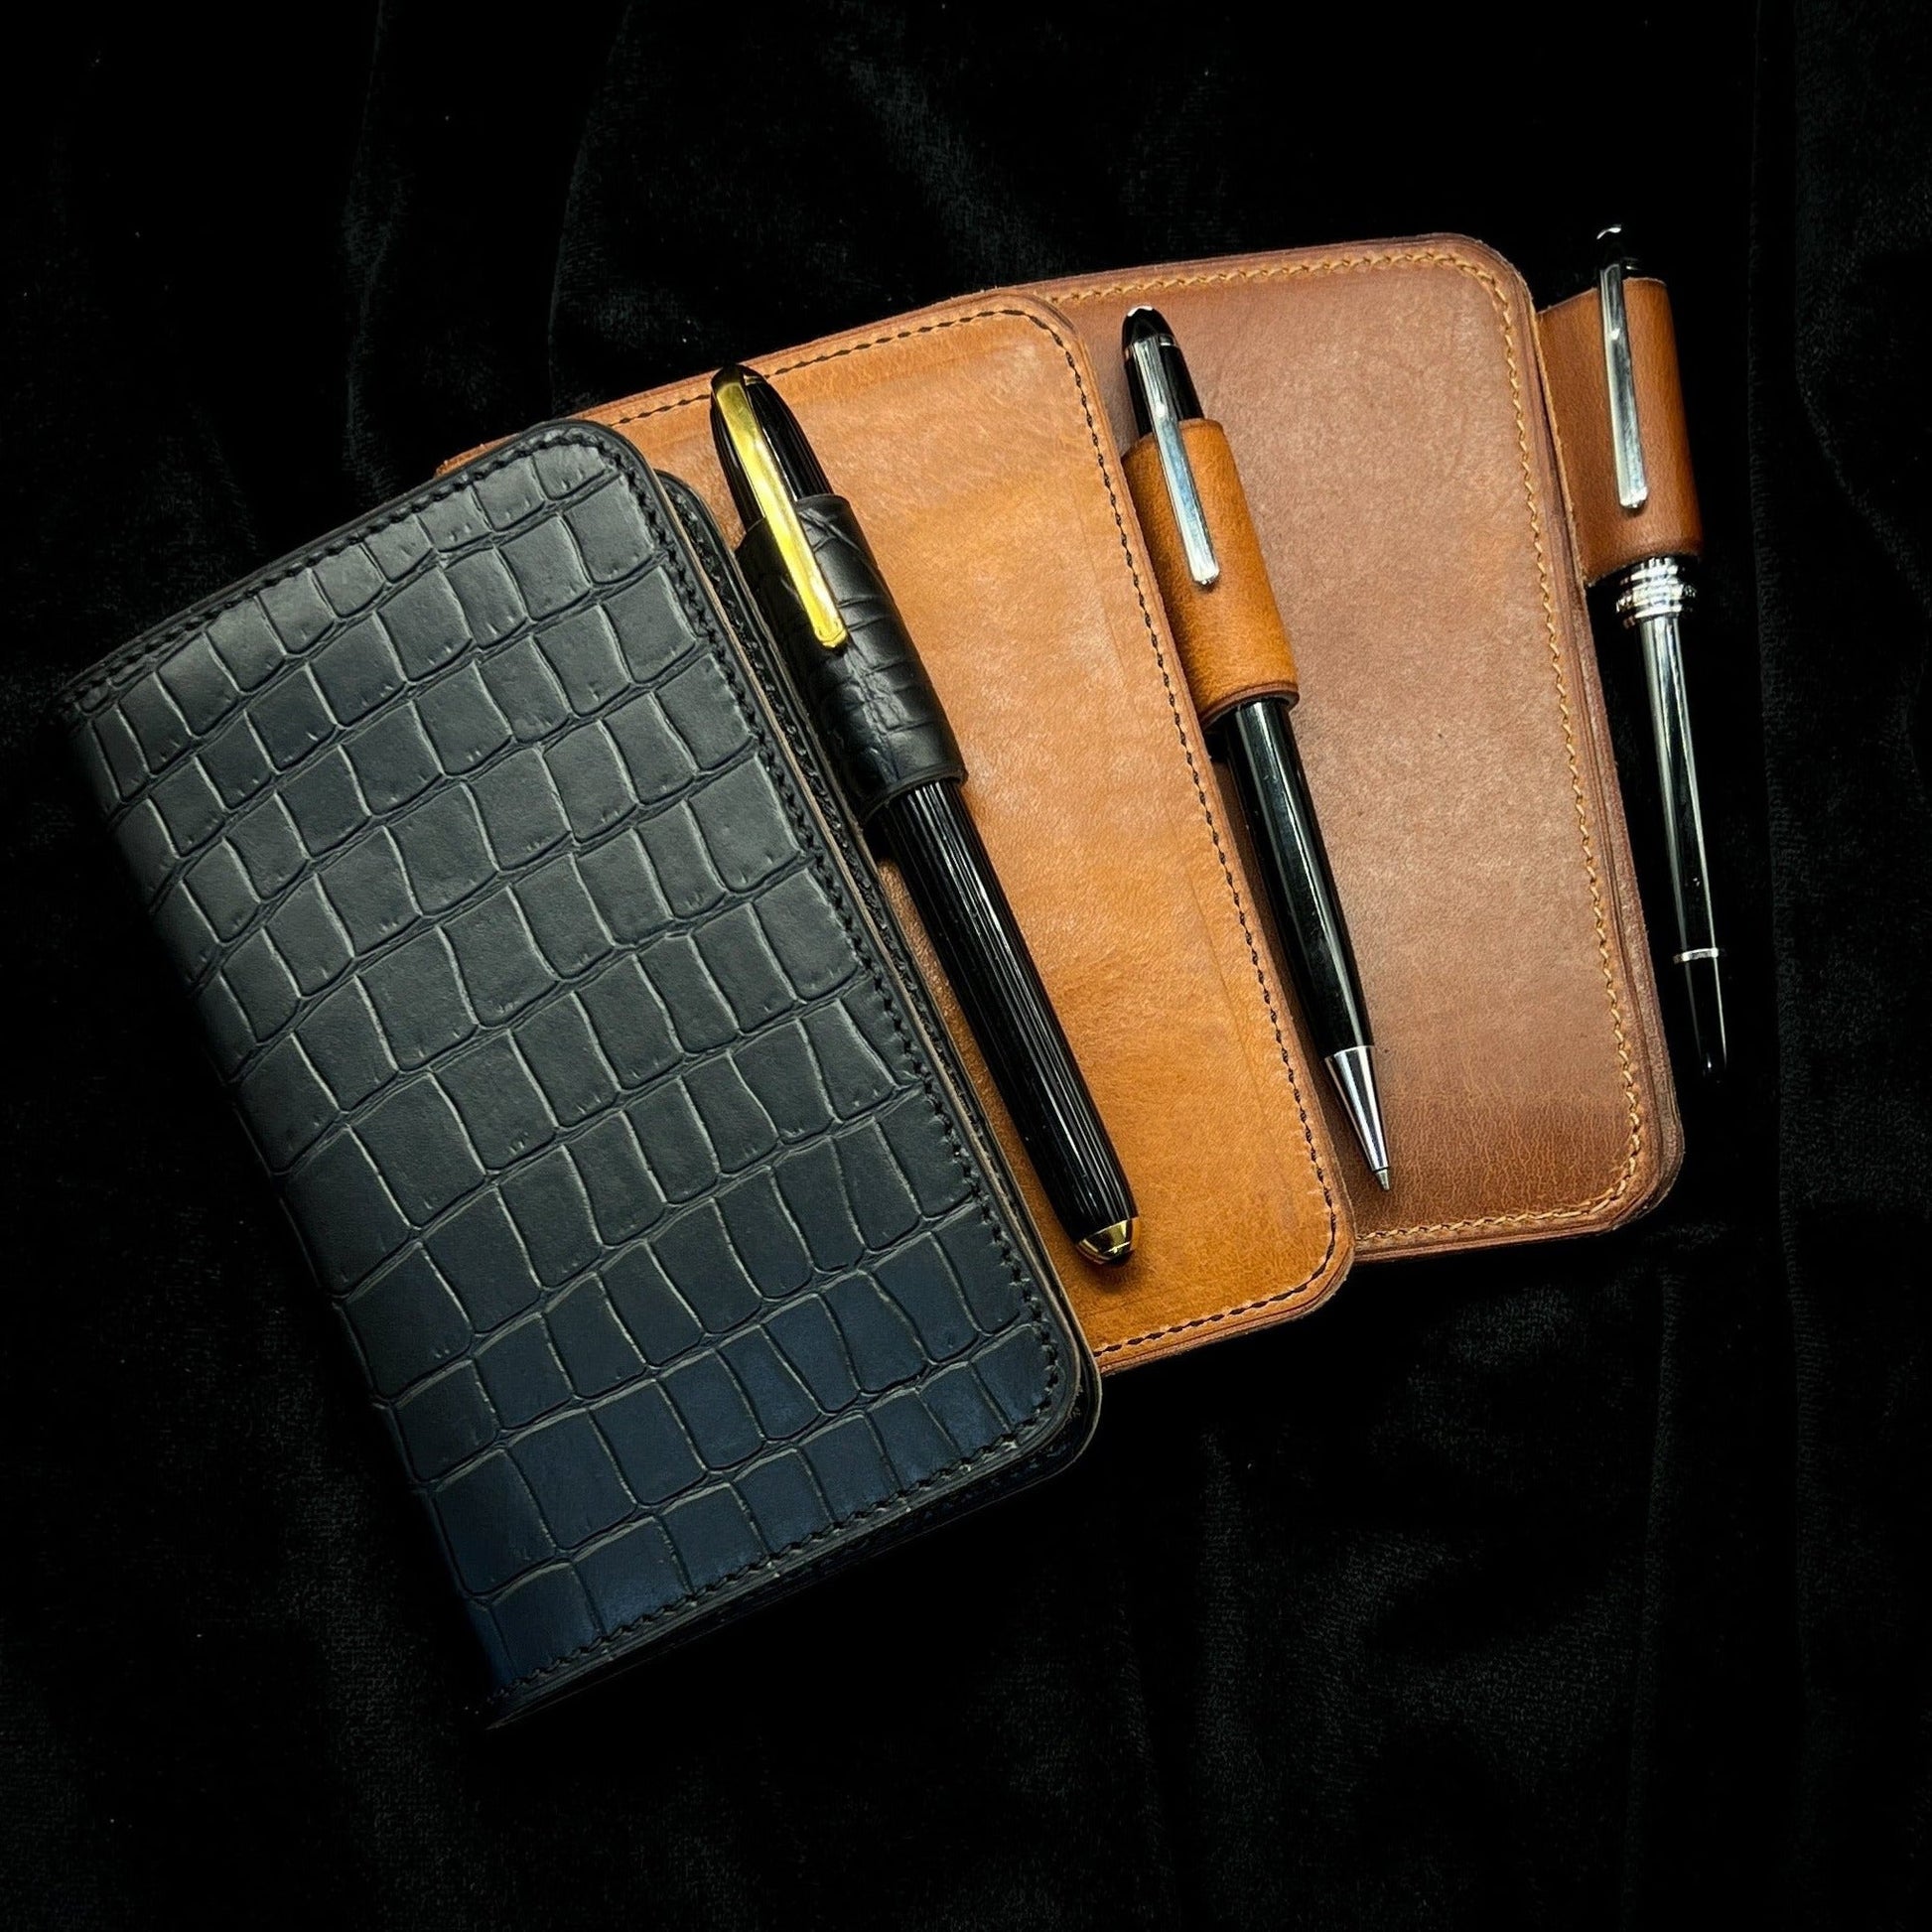 Collection of Handmade Notebook Covers in Horween Leather by Custom Leather and Pen in Houston, TX featuring Cartier and Monteblanc Pens